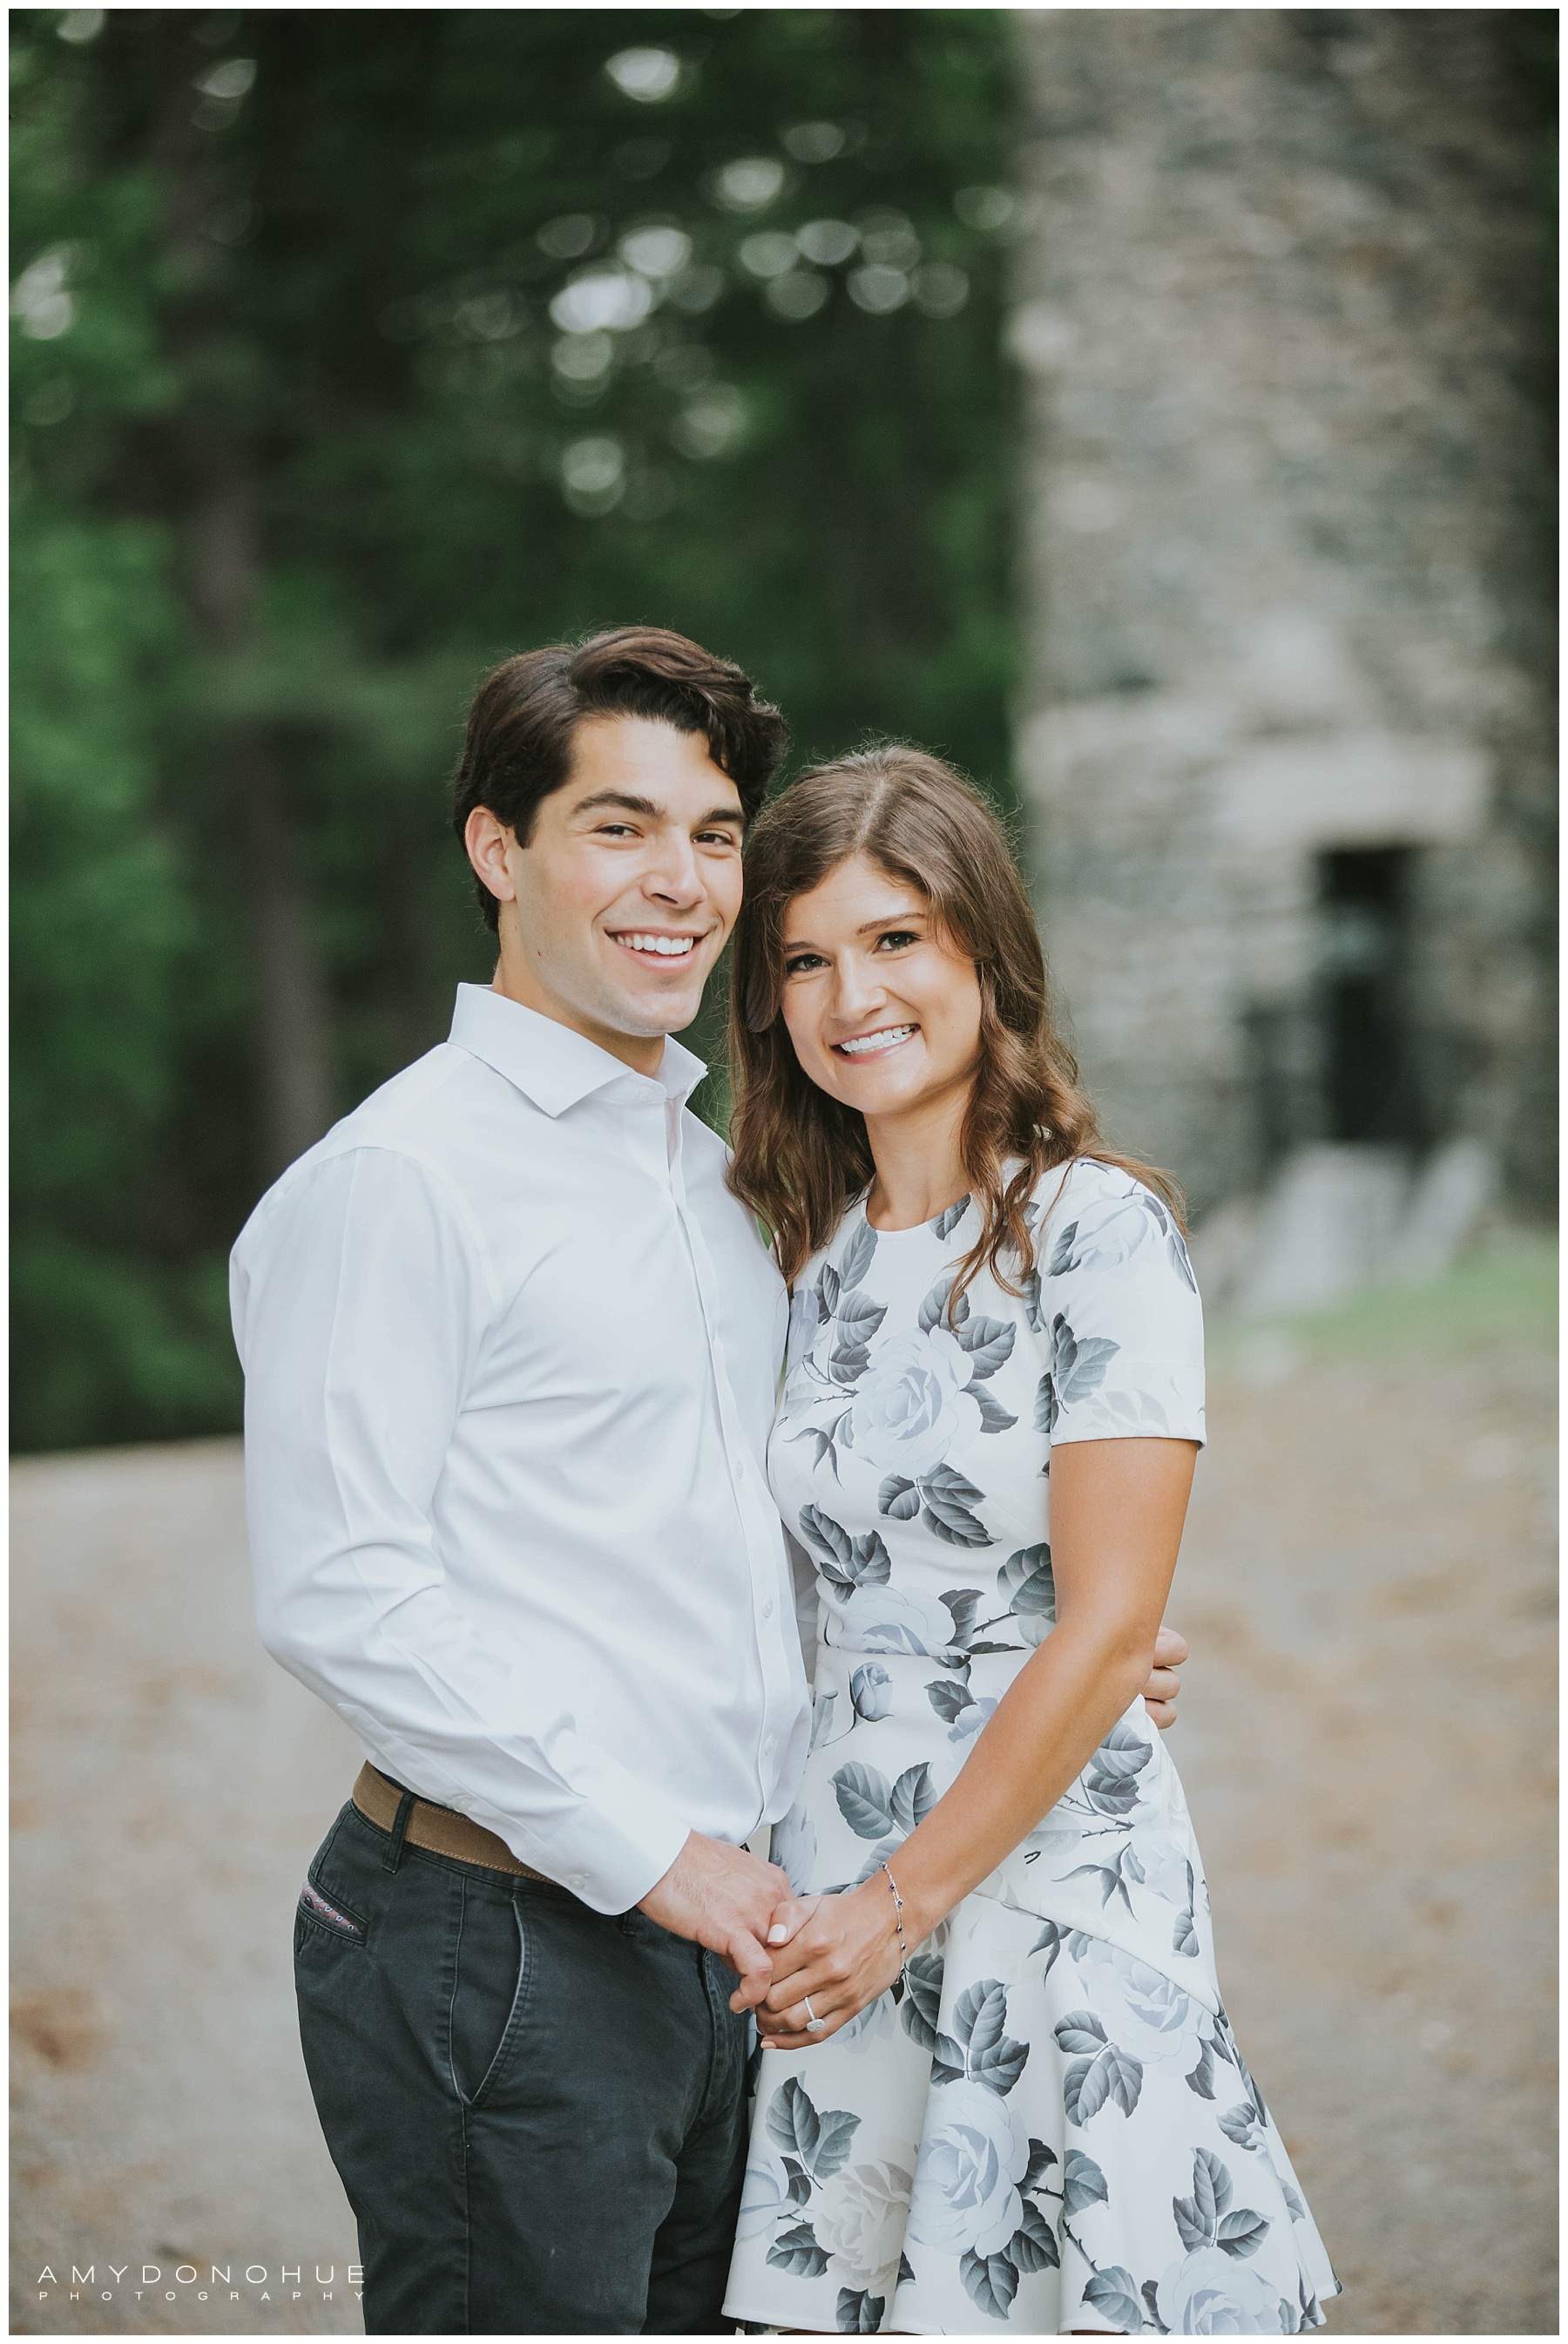 Hanover New Hampshire Engagement and Wedding Photographer at Dartmouth College | © Amy Donohue Photography